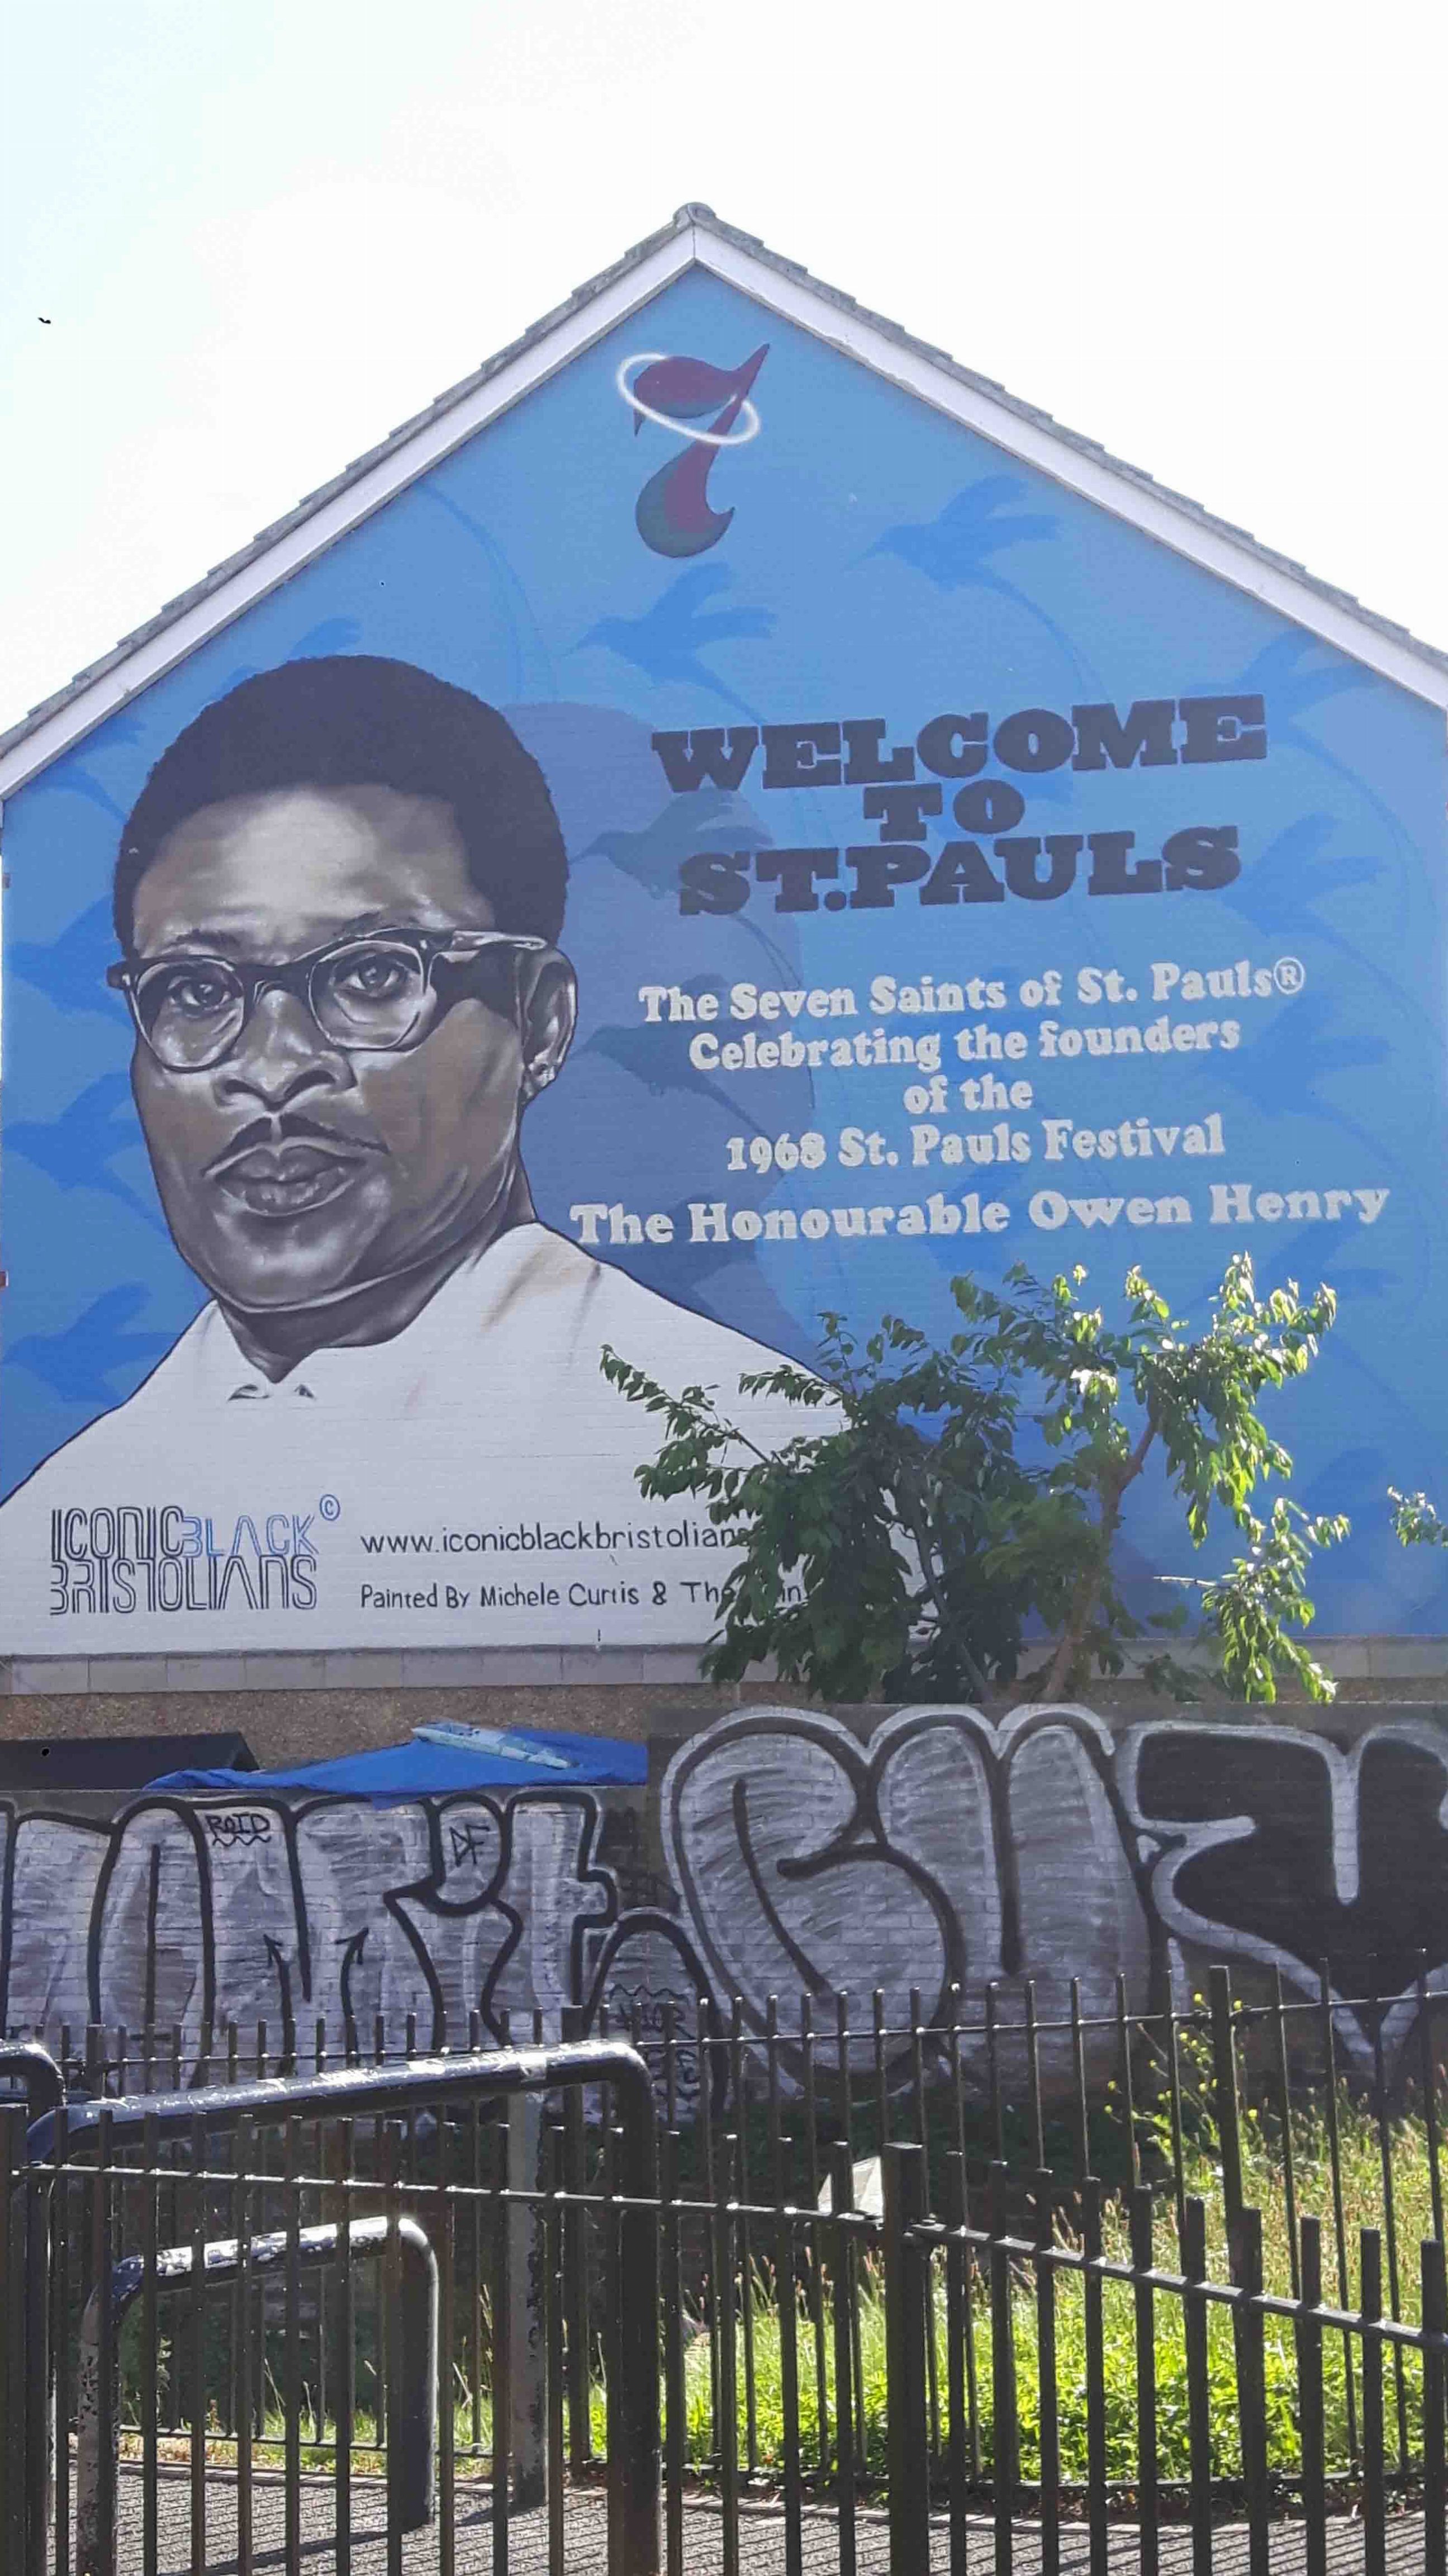  Graffiti image of Owen Henry who was connected with the Bristol Bus Boycott and setting up St. Paul's Carnival.